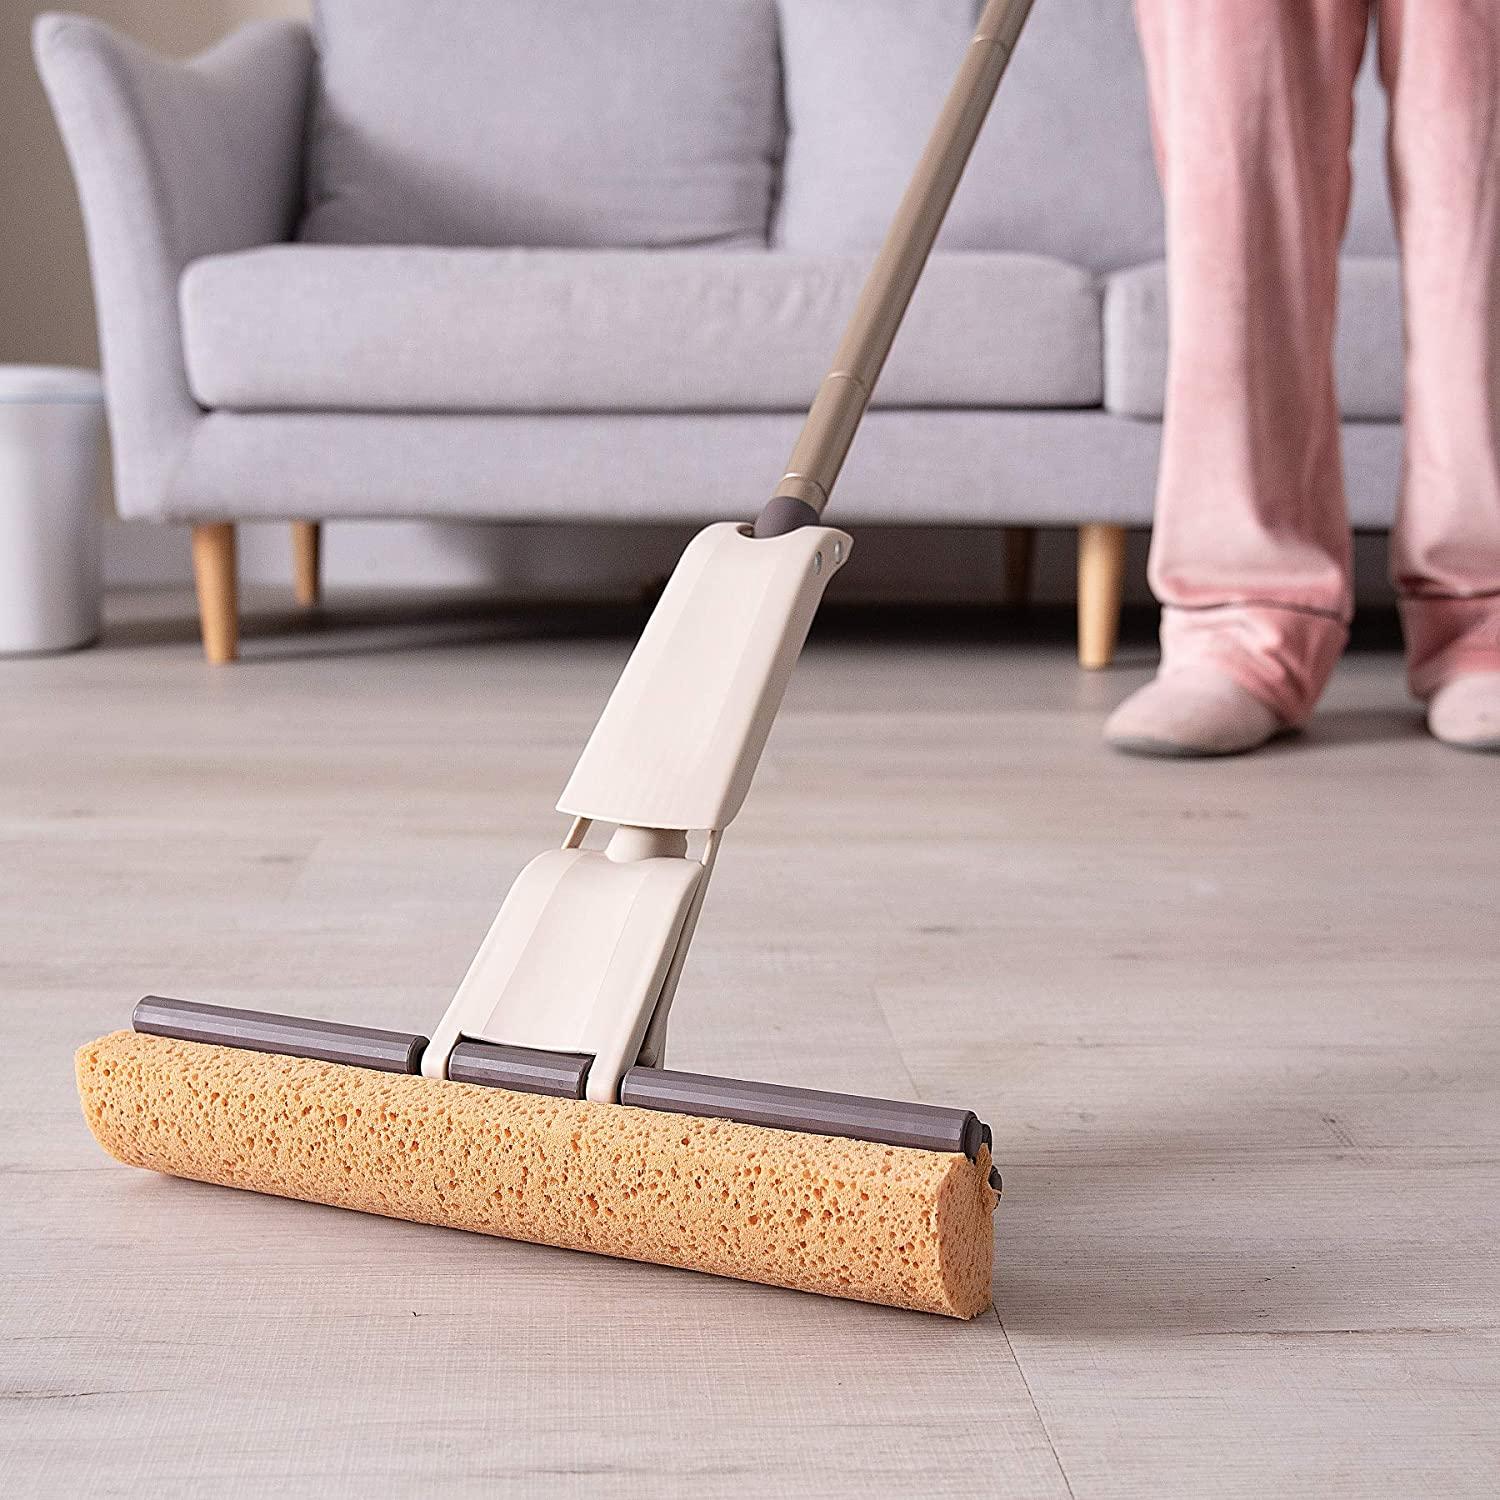 Eyliden Dust Mop, Microfiber Mops for Floor Cleaning, with Extendable